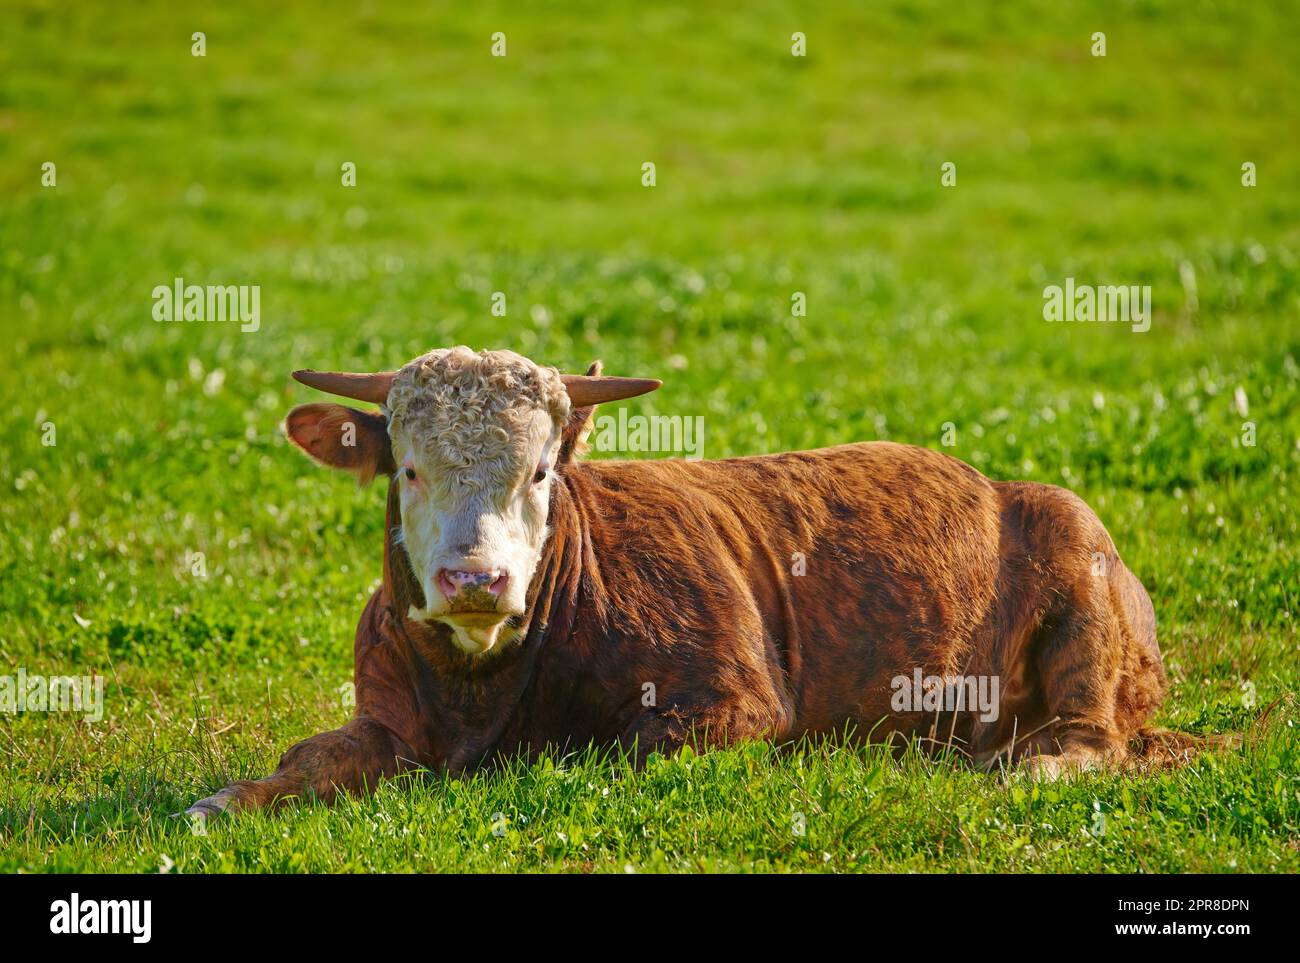 One hereford cow sitting alone on a farm pasture. Hairy animal isolated against green grass on a remote farmland and agriculture estate. Raising live cattle, grass fed diary farming industry Stock Photo